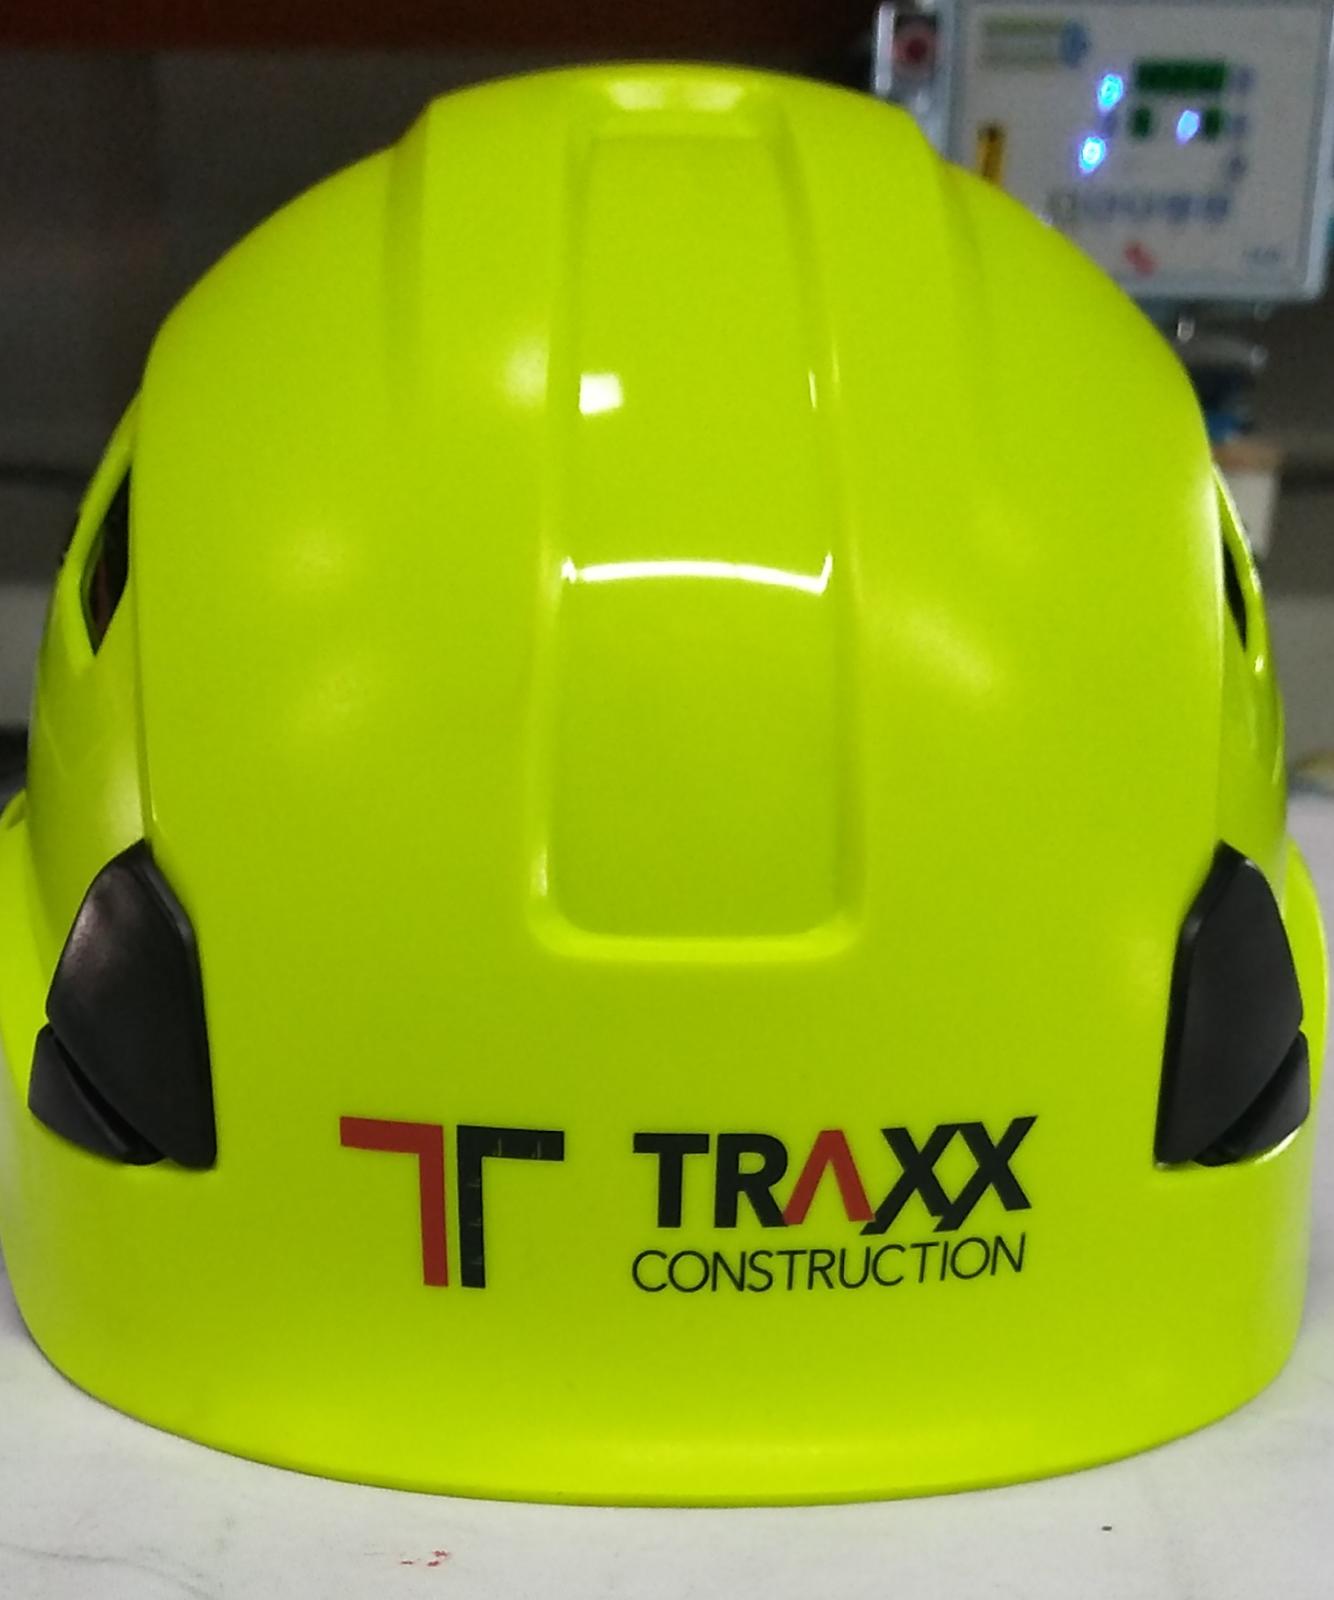 Get Noticed with a Customized Colorful Helmet from Promogator